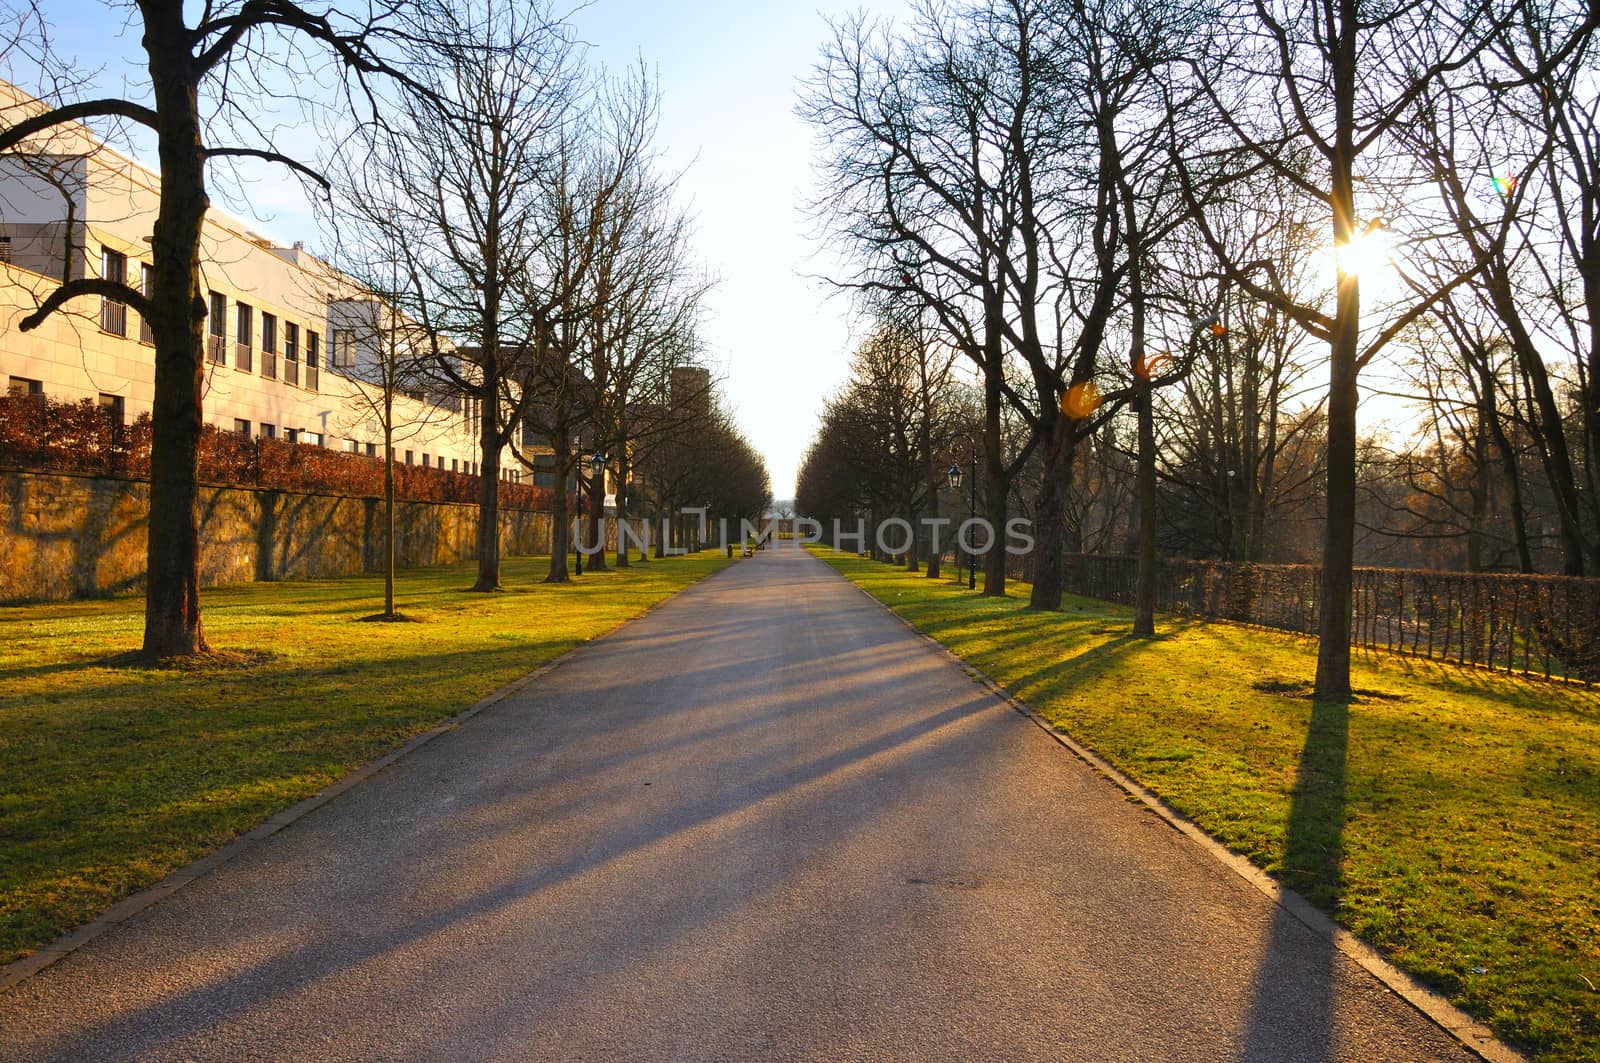 Shadow alley in early spring in Stadtschloss park in Fulda, Hess by Eagle2308